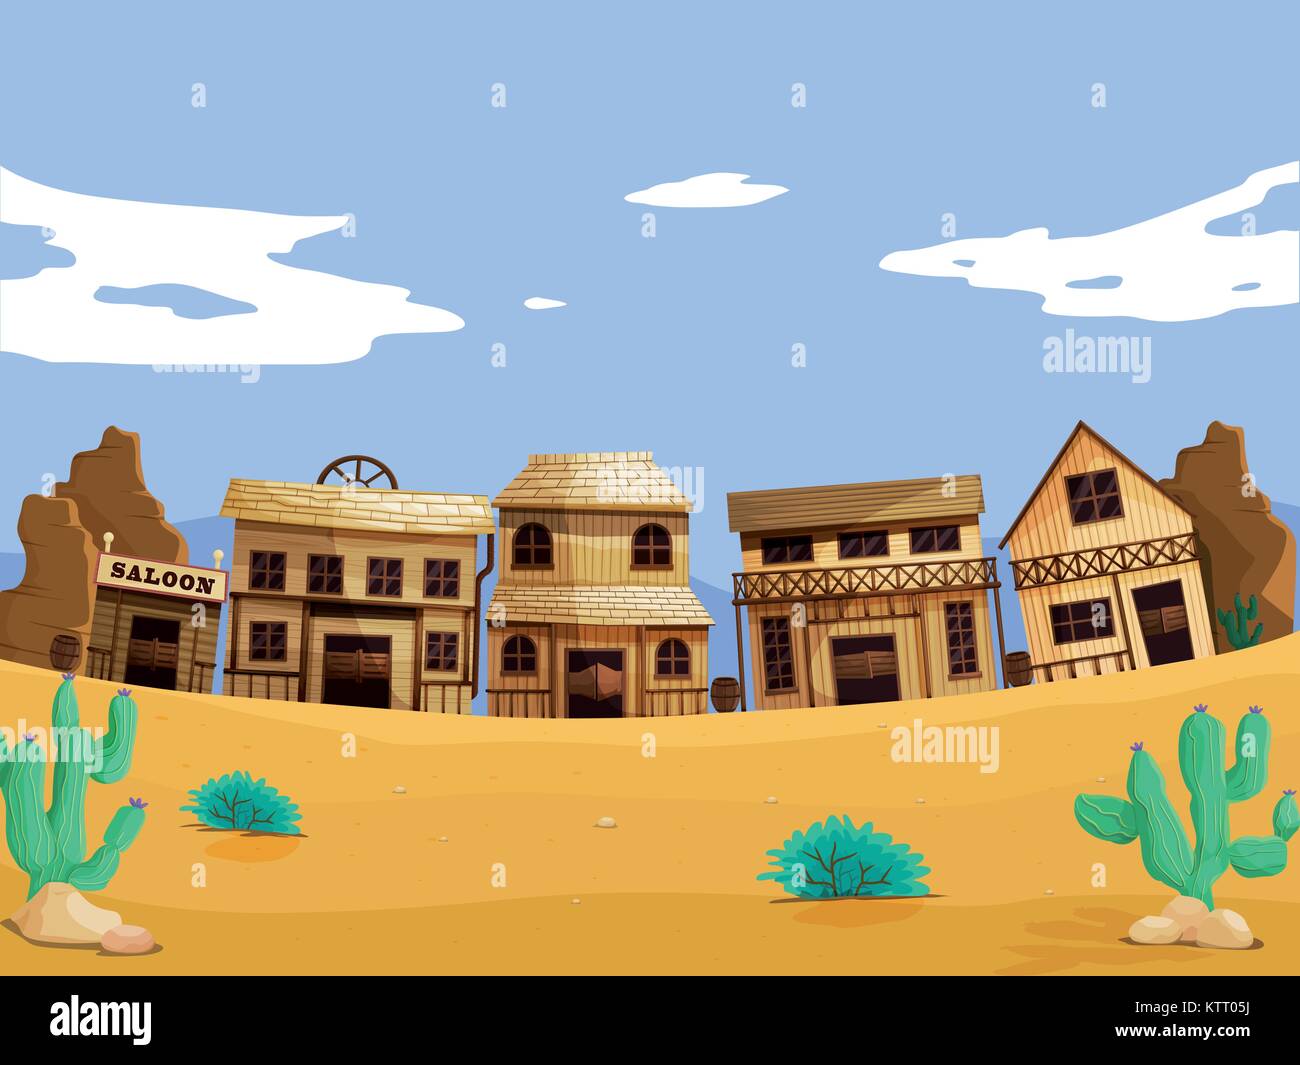 Wild west illustration scene with detail Stock Vector